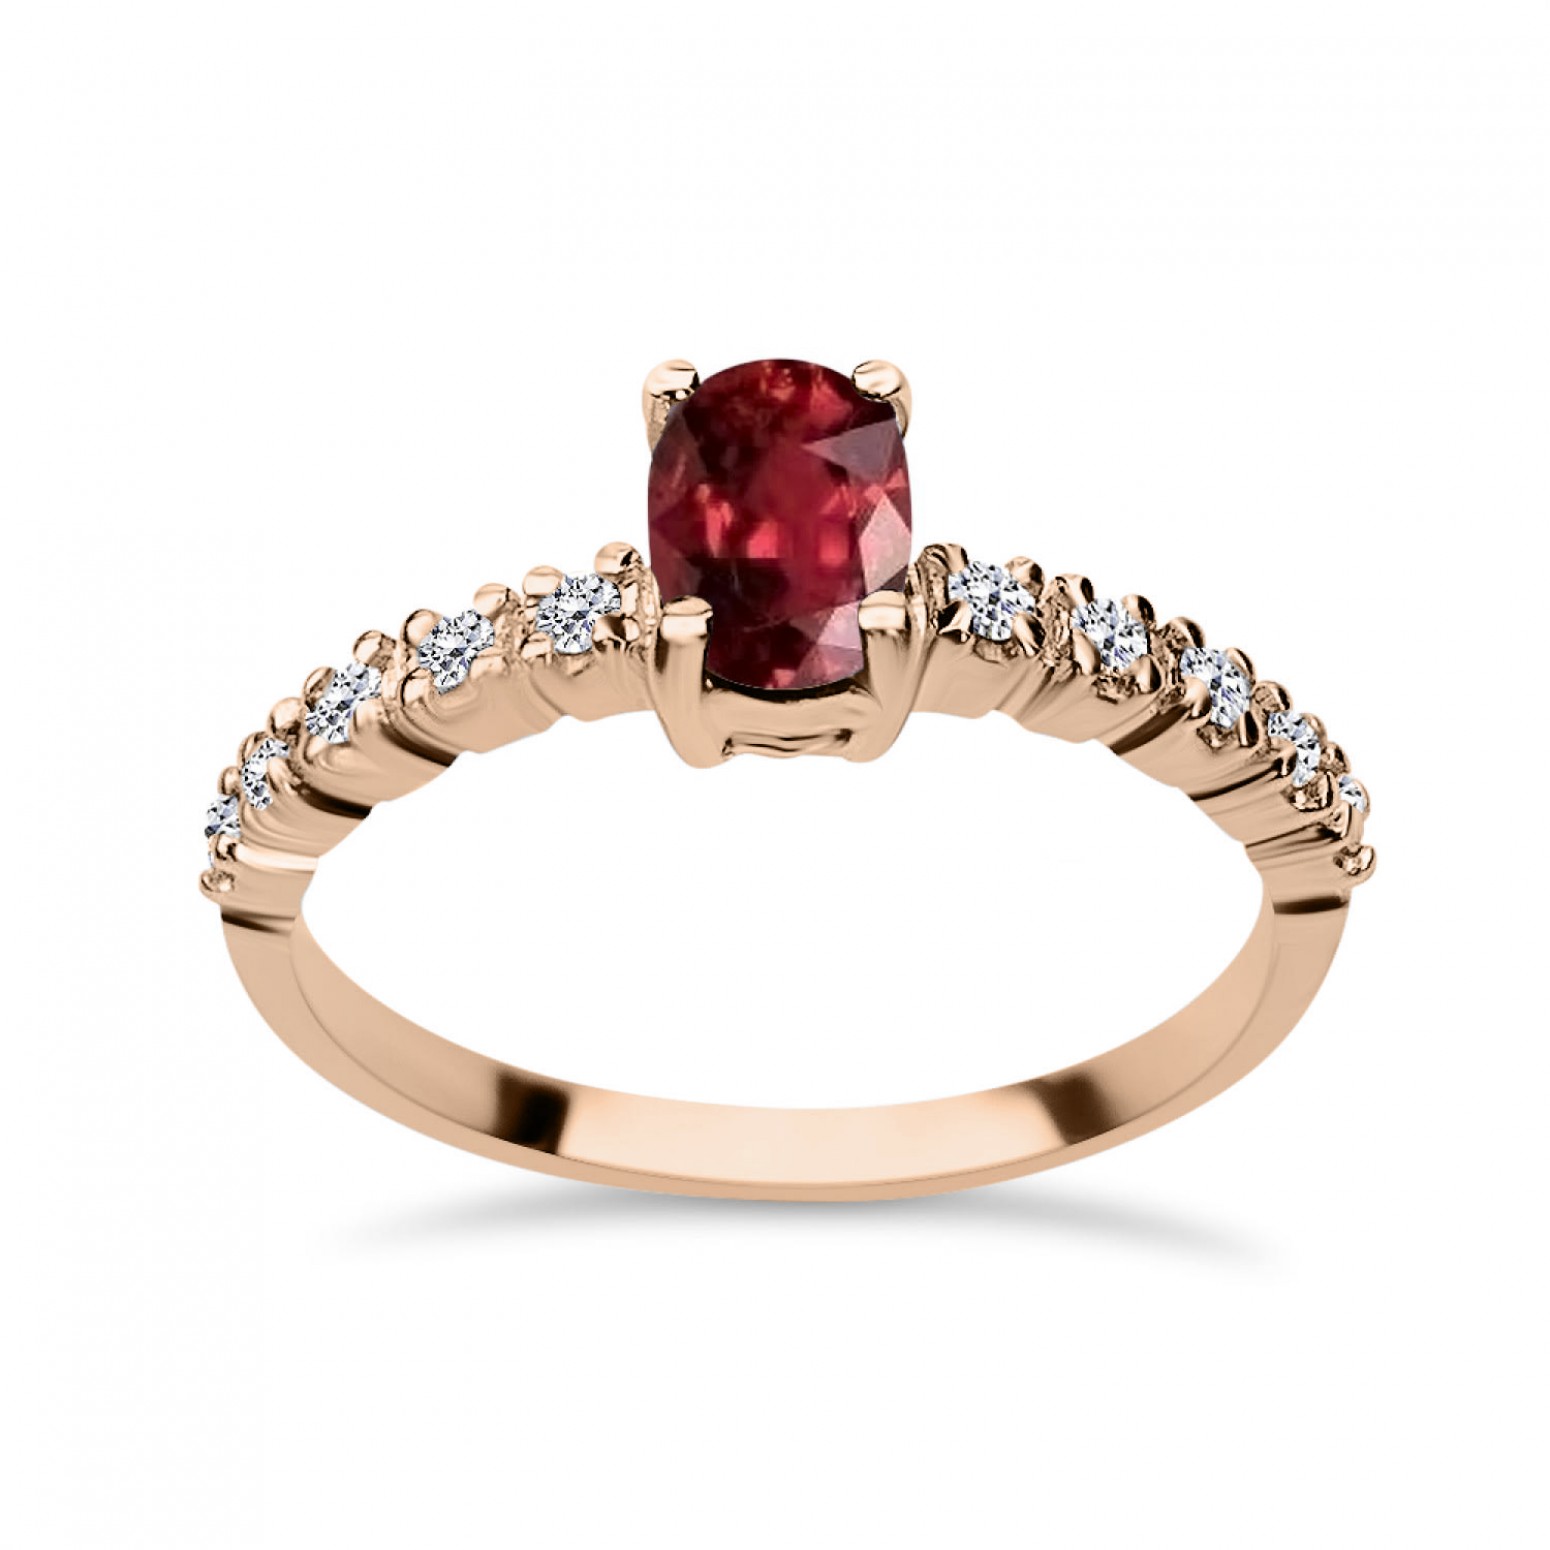 Solitaire oval ring 18K pink gold with ruby 0.77ct and diamonds VS1, G da4016 ENGAGEMENT RINGS Κοσμηματα - chrilia.gr